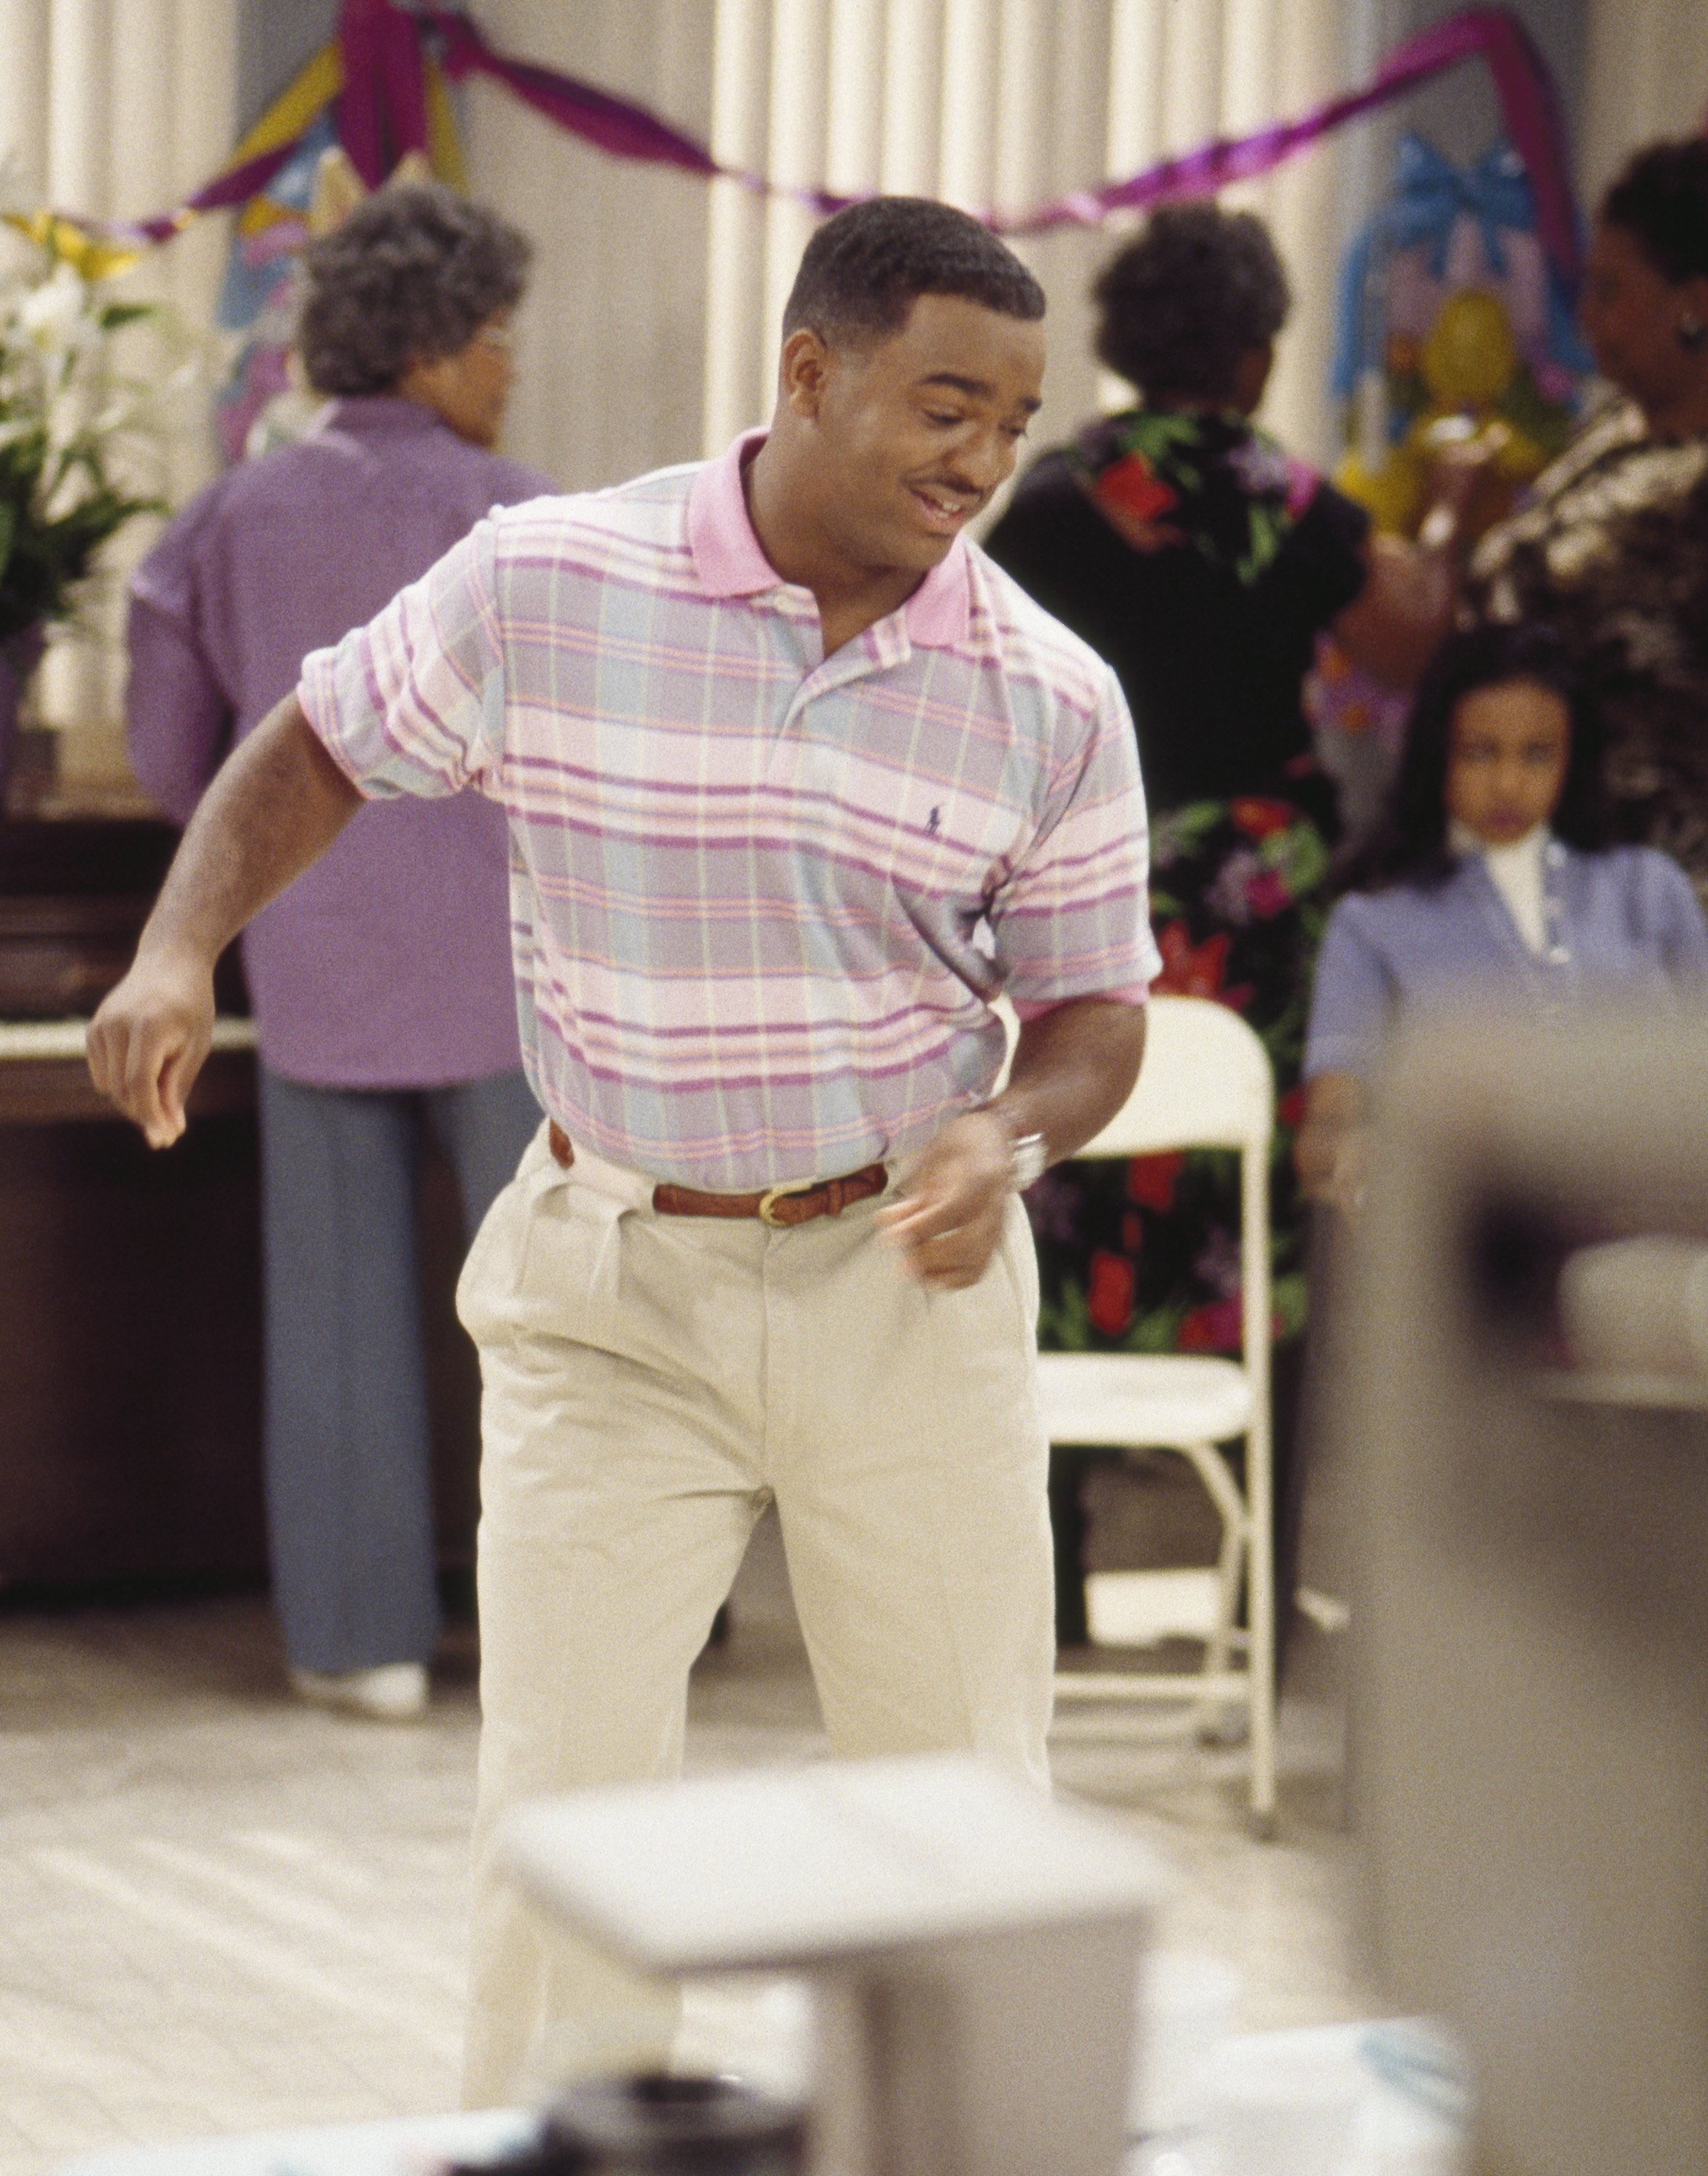 The actor played Carlton on the show - and sparked a memorable dance